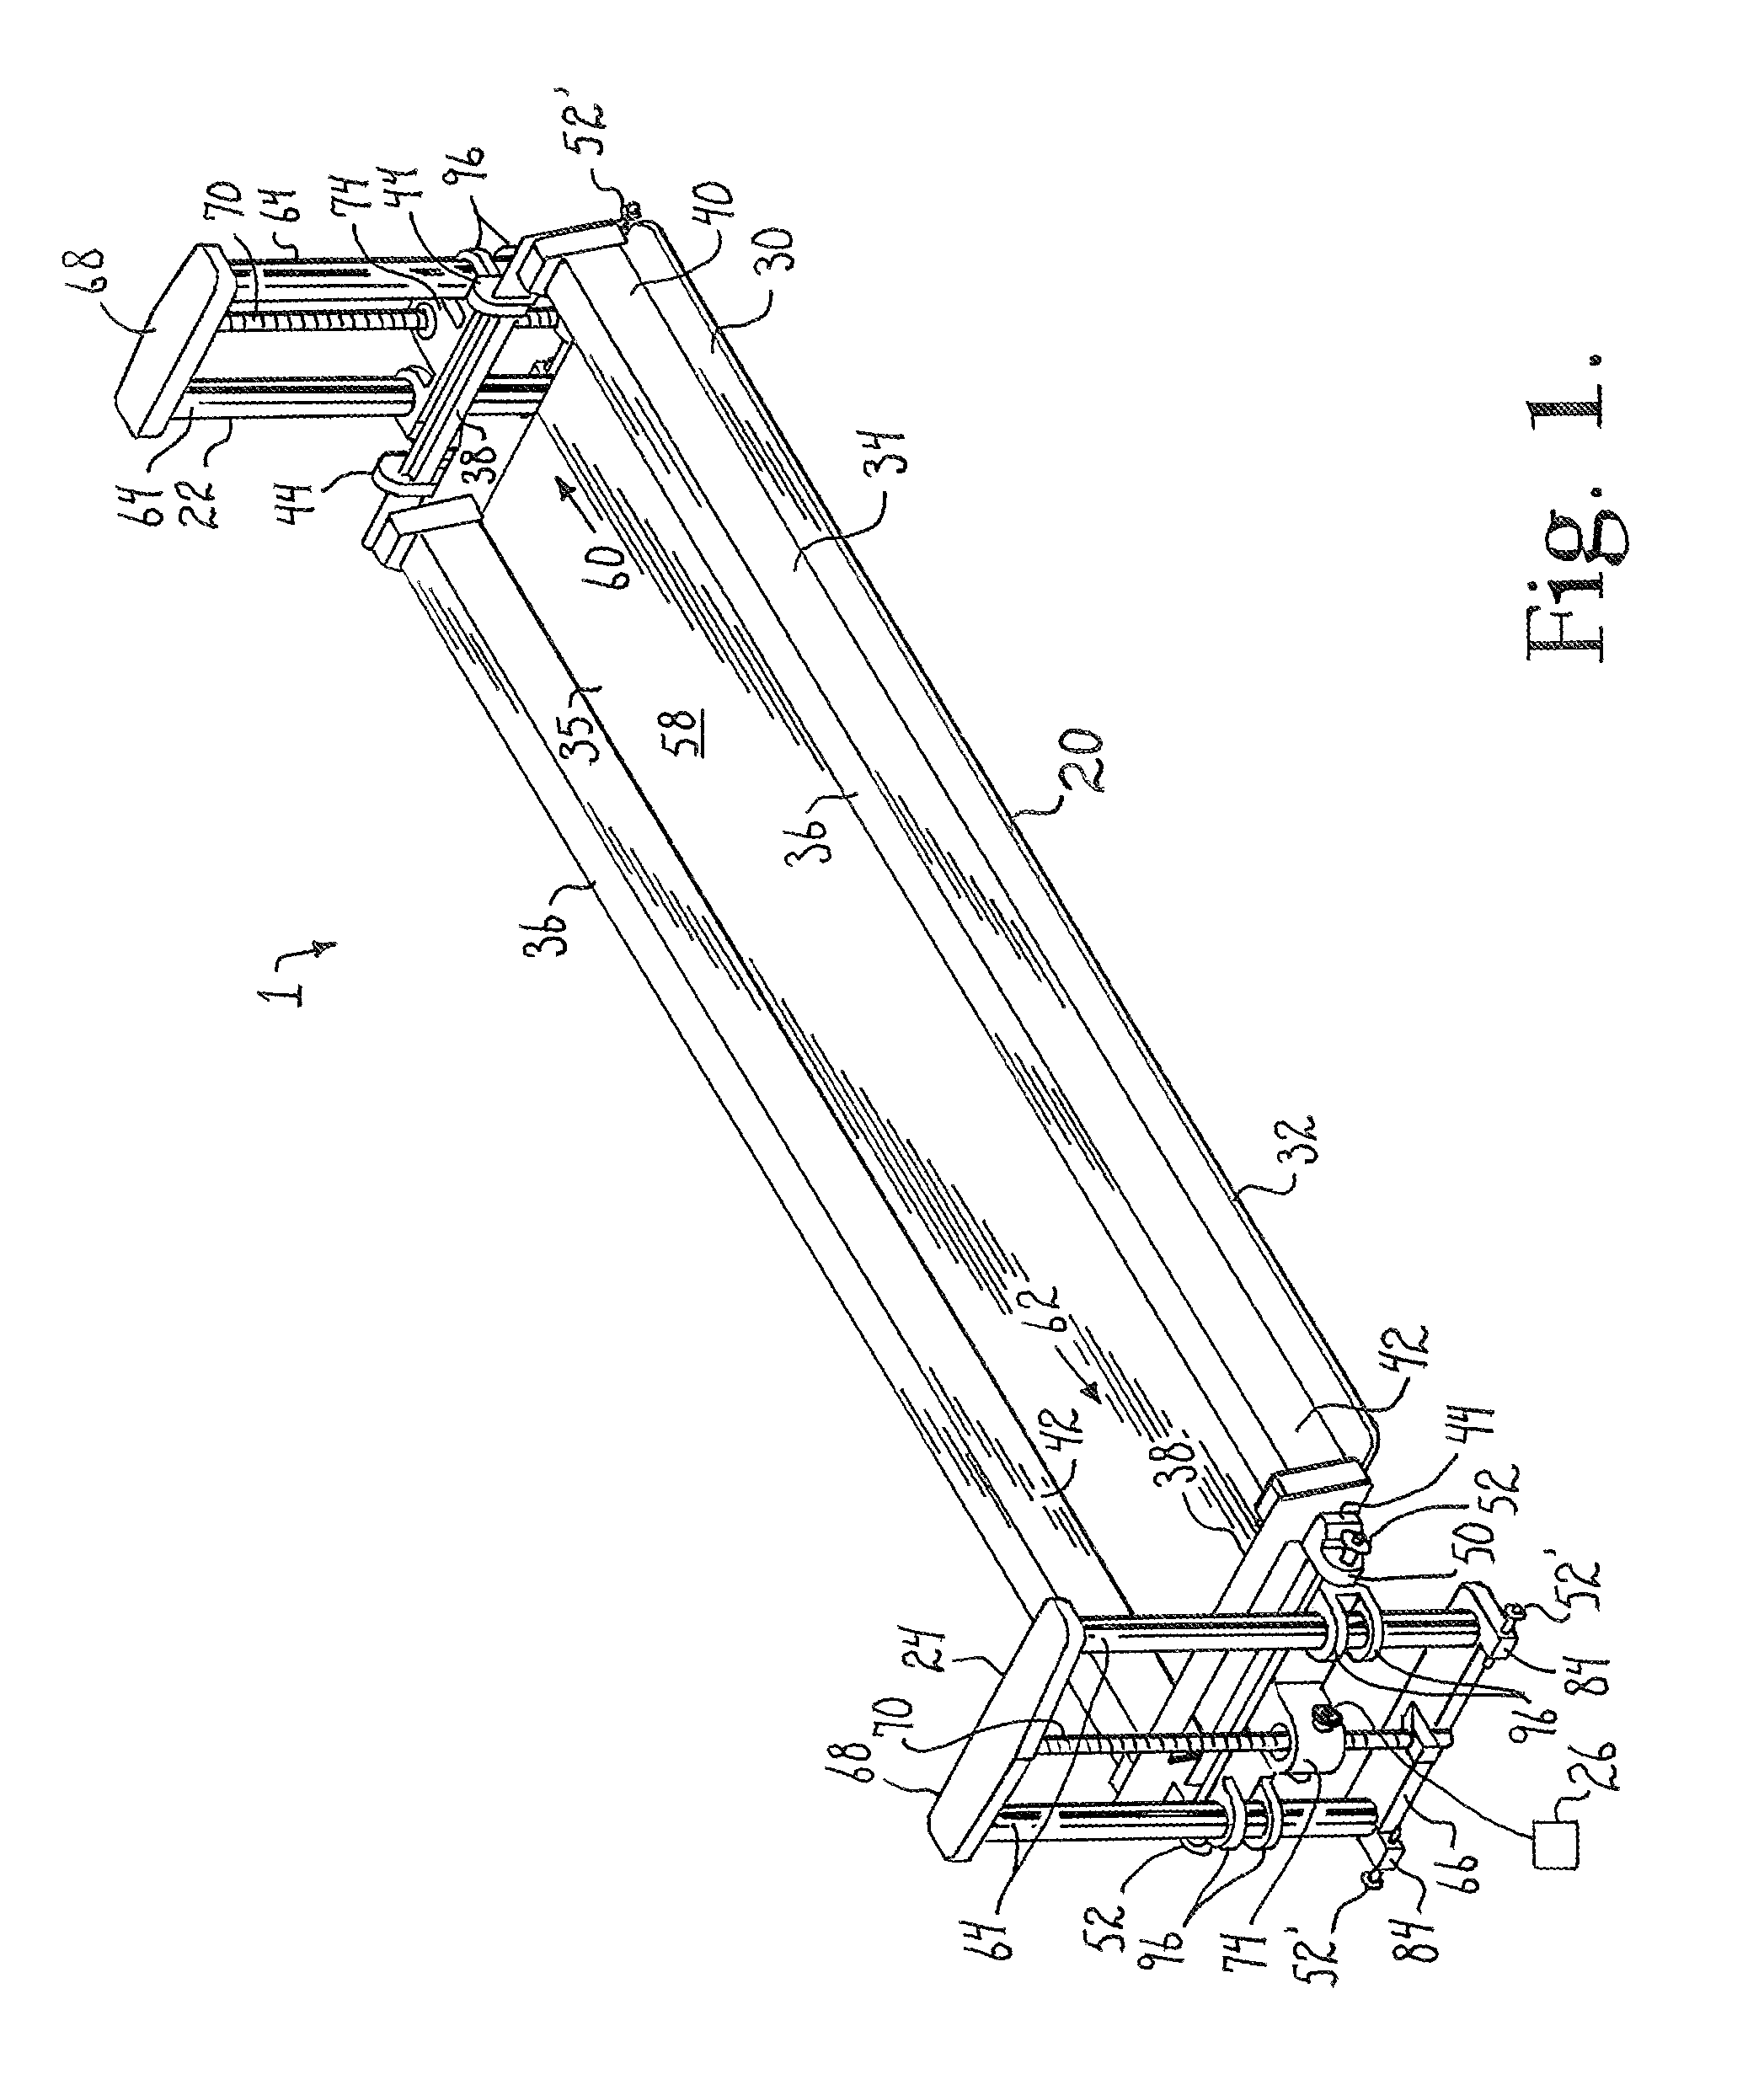 Syncronized patient elevation and positioning apparatus positioning support systems